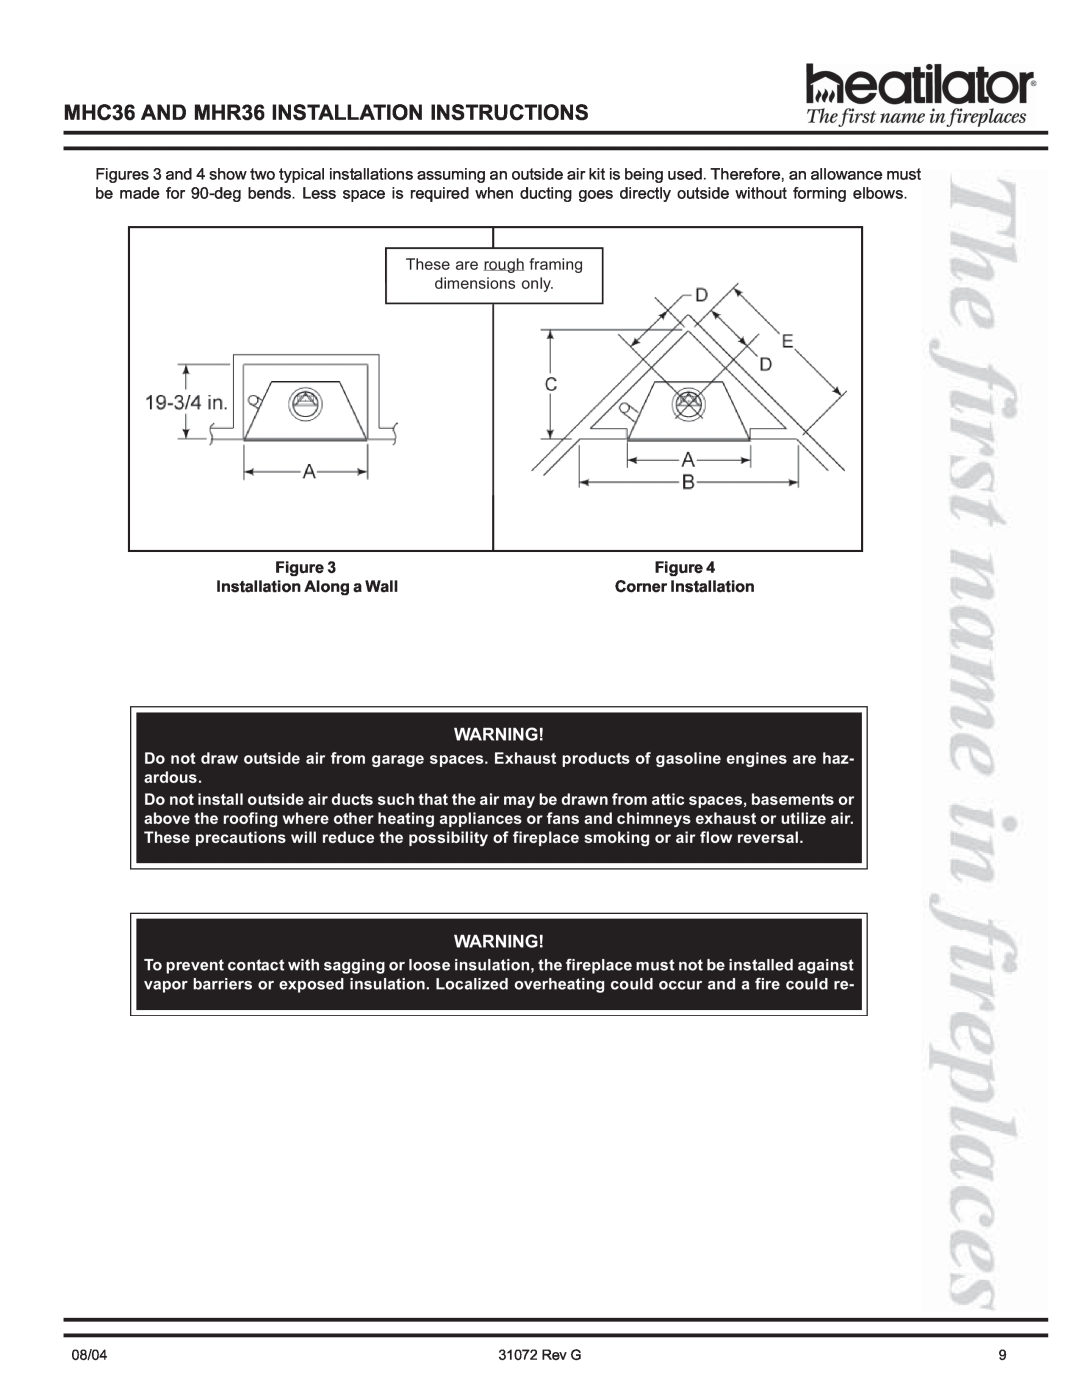 Heart & Home Collectables manual MHC36 AND MHR36 INSTALLATION INSTRUCTIONS, These are rough framing dimensions only 